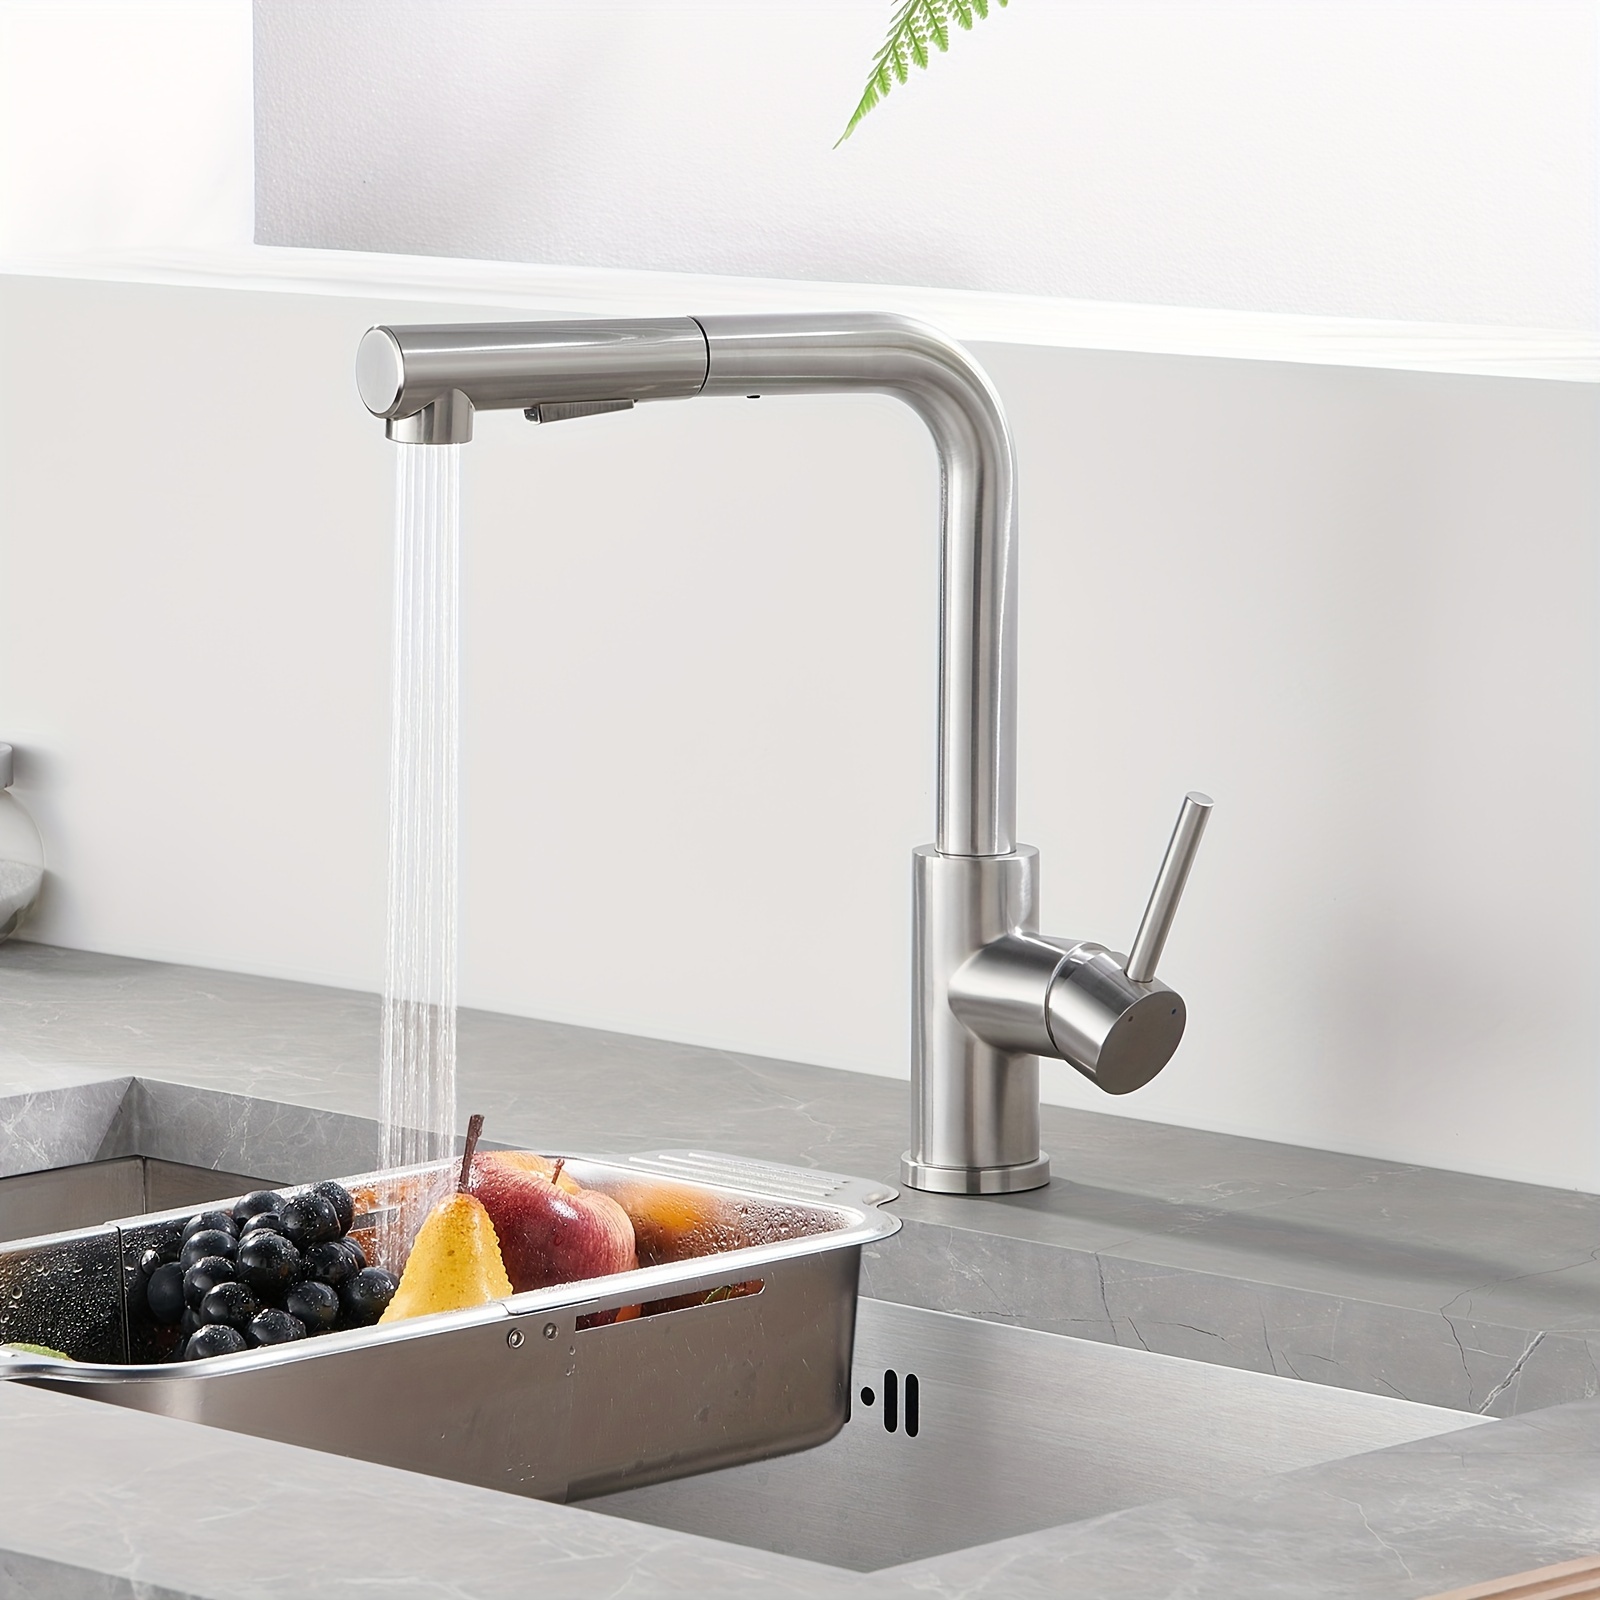 

Kitchen Pull-out Tap, Kitchen Mixer Tap With Shower, Kitchen Mixer Tap 360° Swivel, Kitchen Mixer Tap 2 Jet, Single Lever Sink Mixer Made Of Brushed Stainless Steel